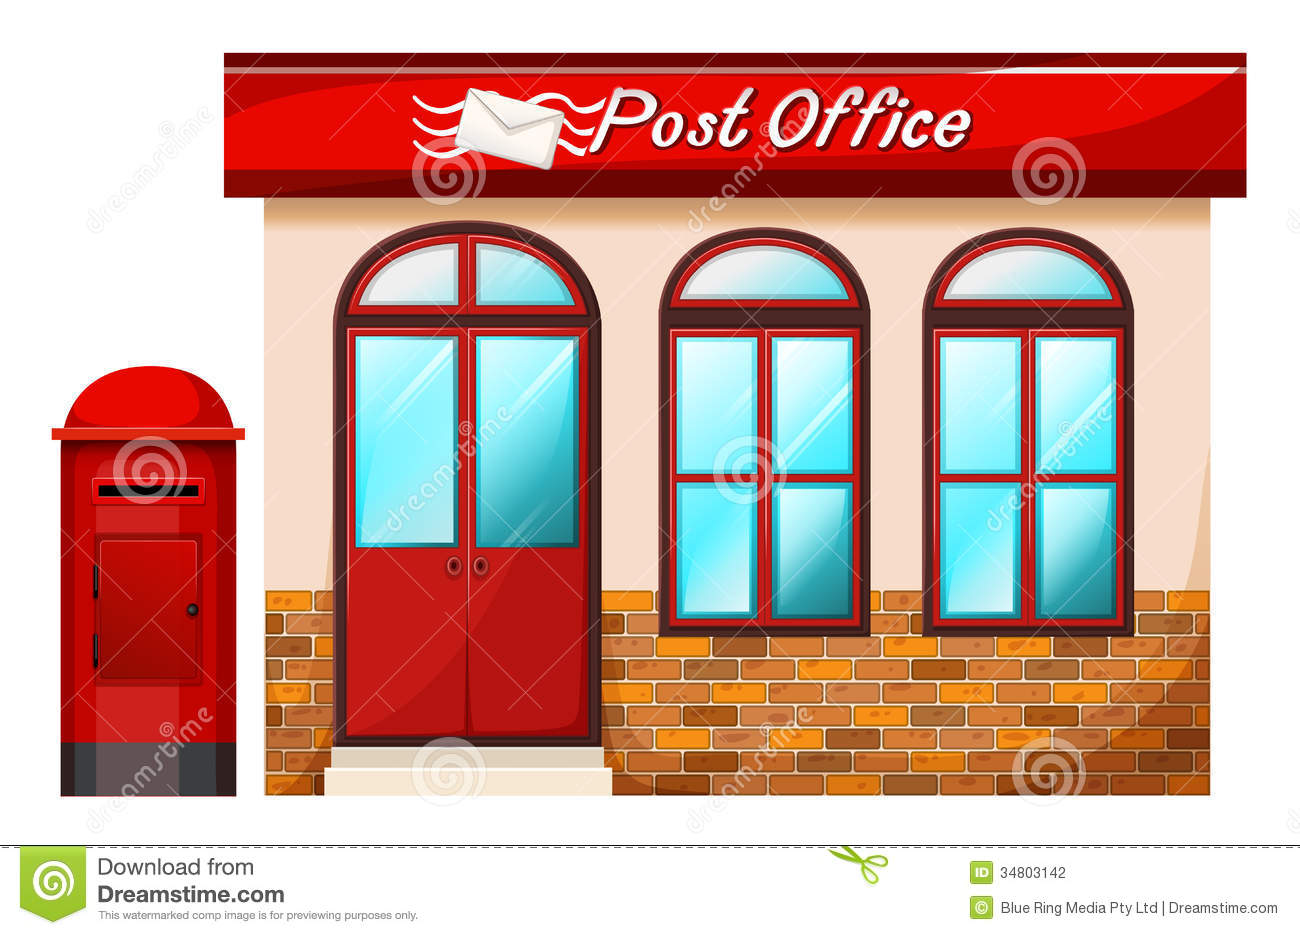 Building . Buildings clipart post office